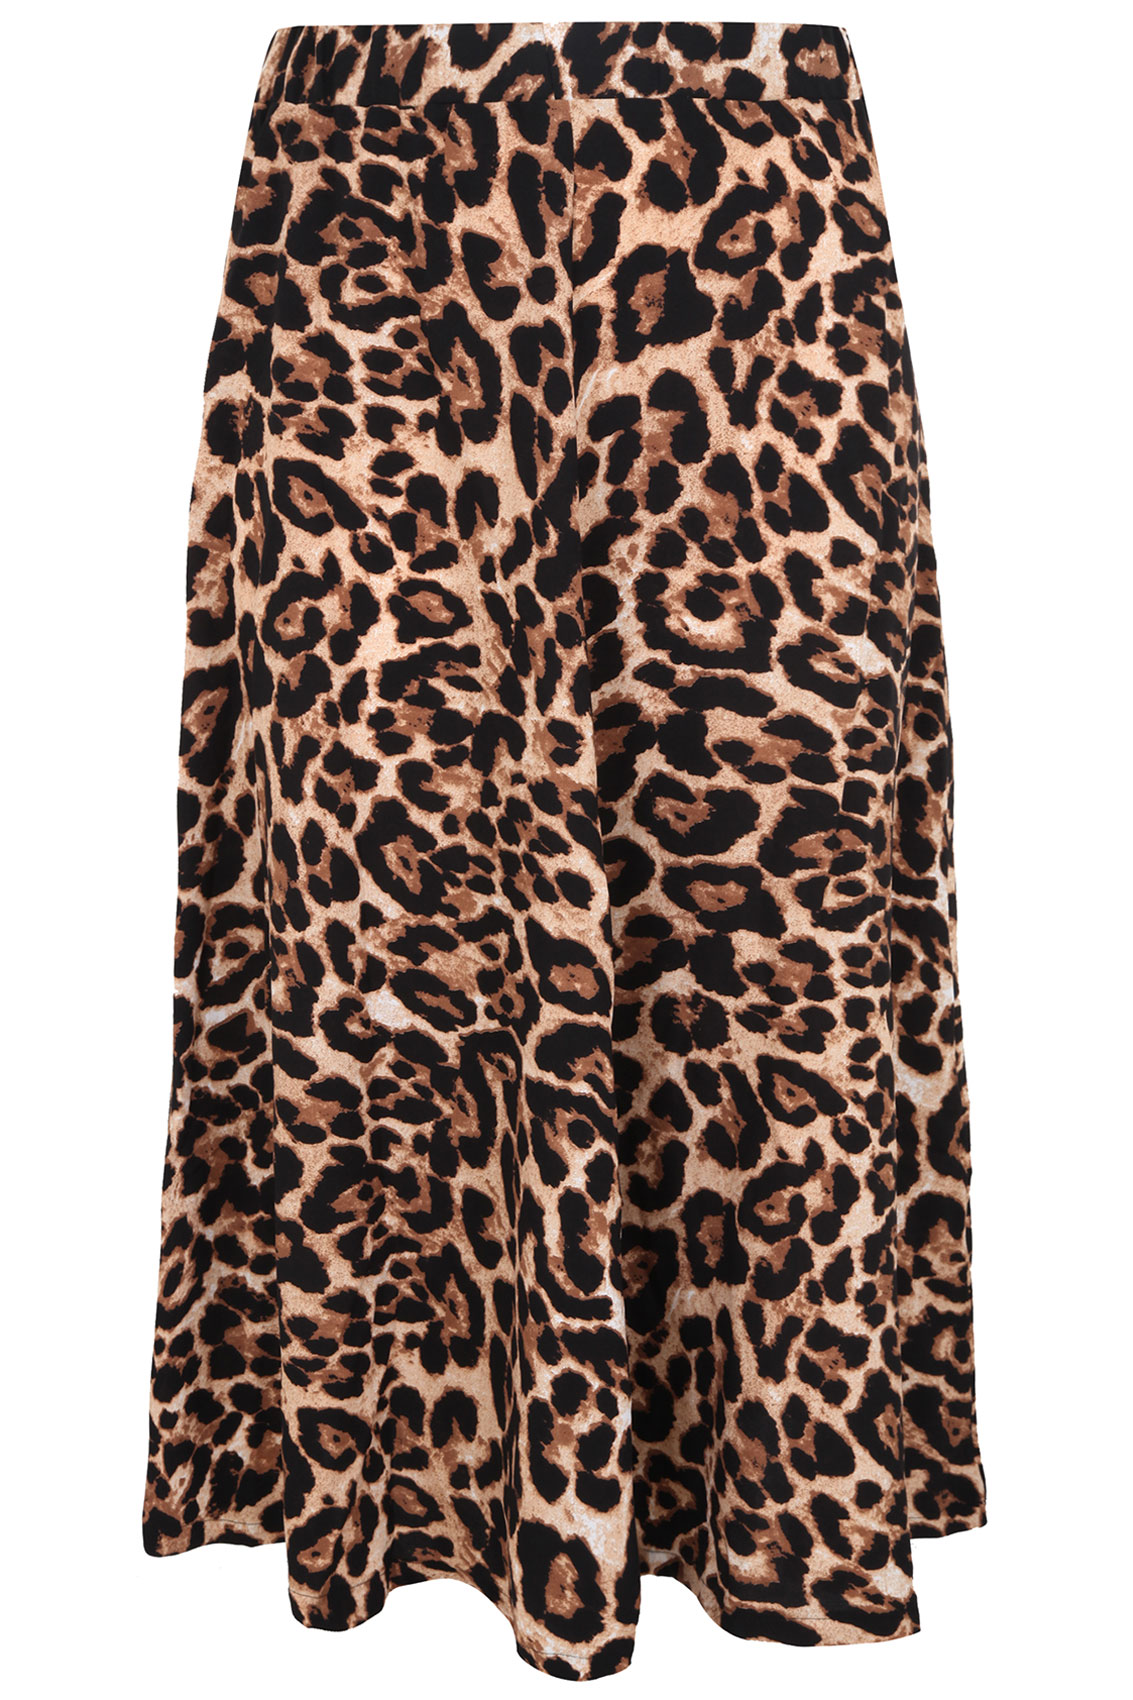 Leopard Print Maxi Skirt With Panel Detail Plus size 16,18,20,22,24,26